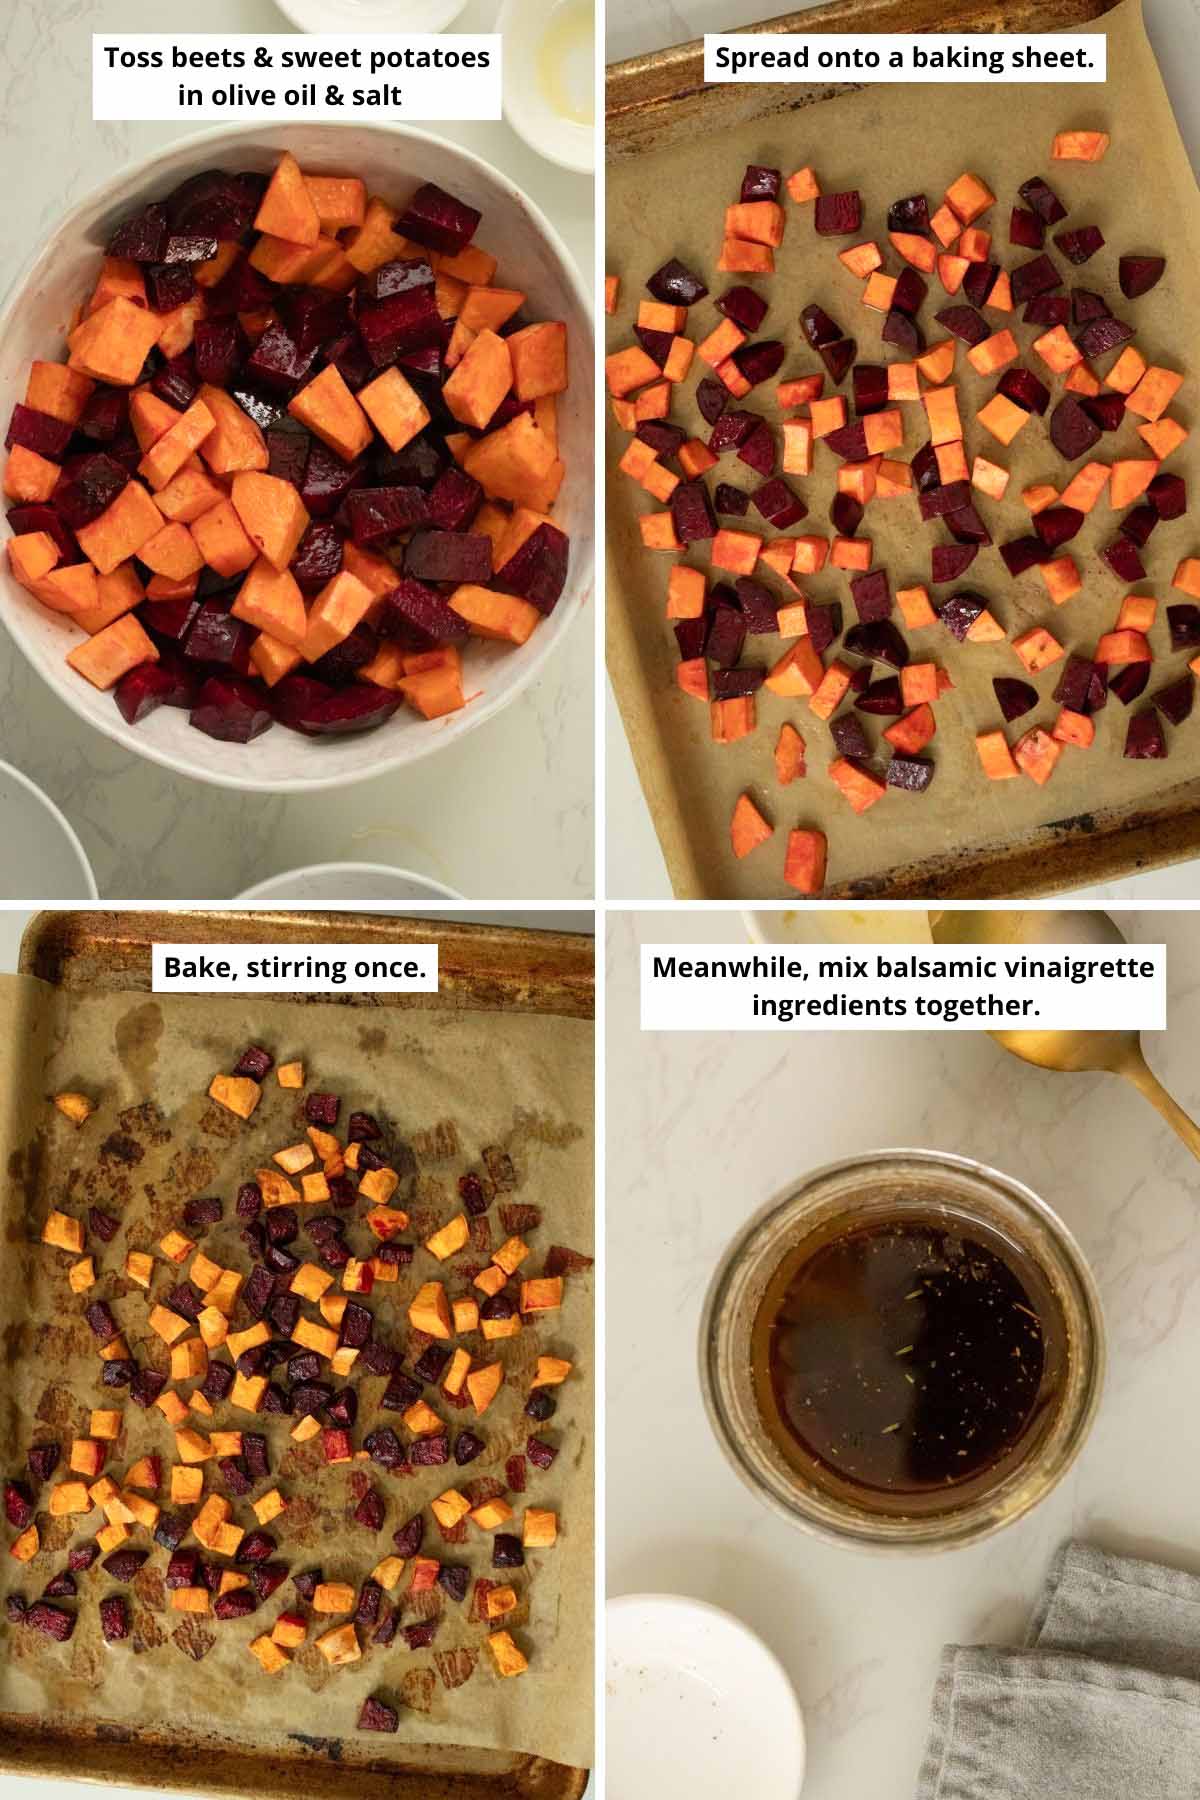 image collage showing beets and sweet potatoes in a bowl and spread onto the baking sheet before and after baking and the jar of vinaigrette